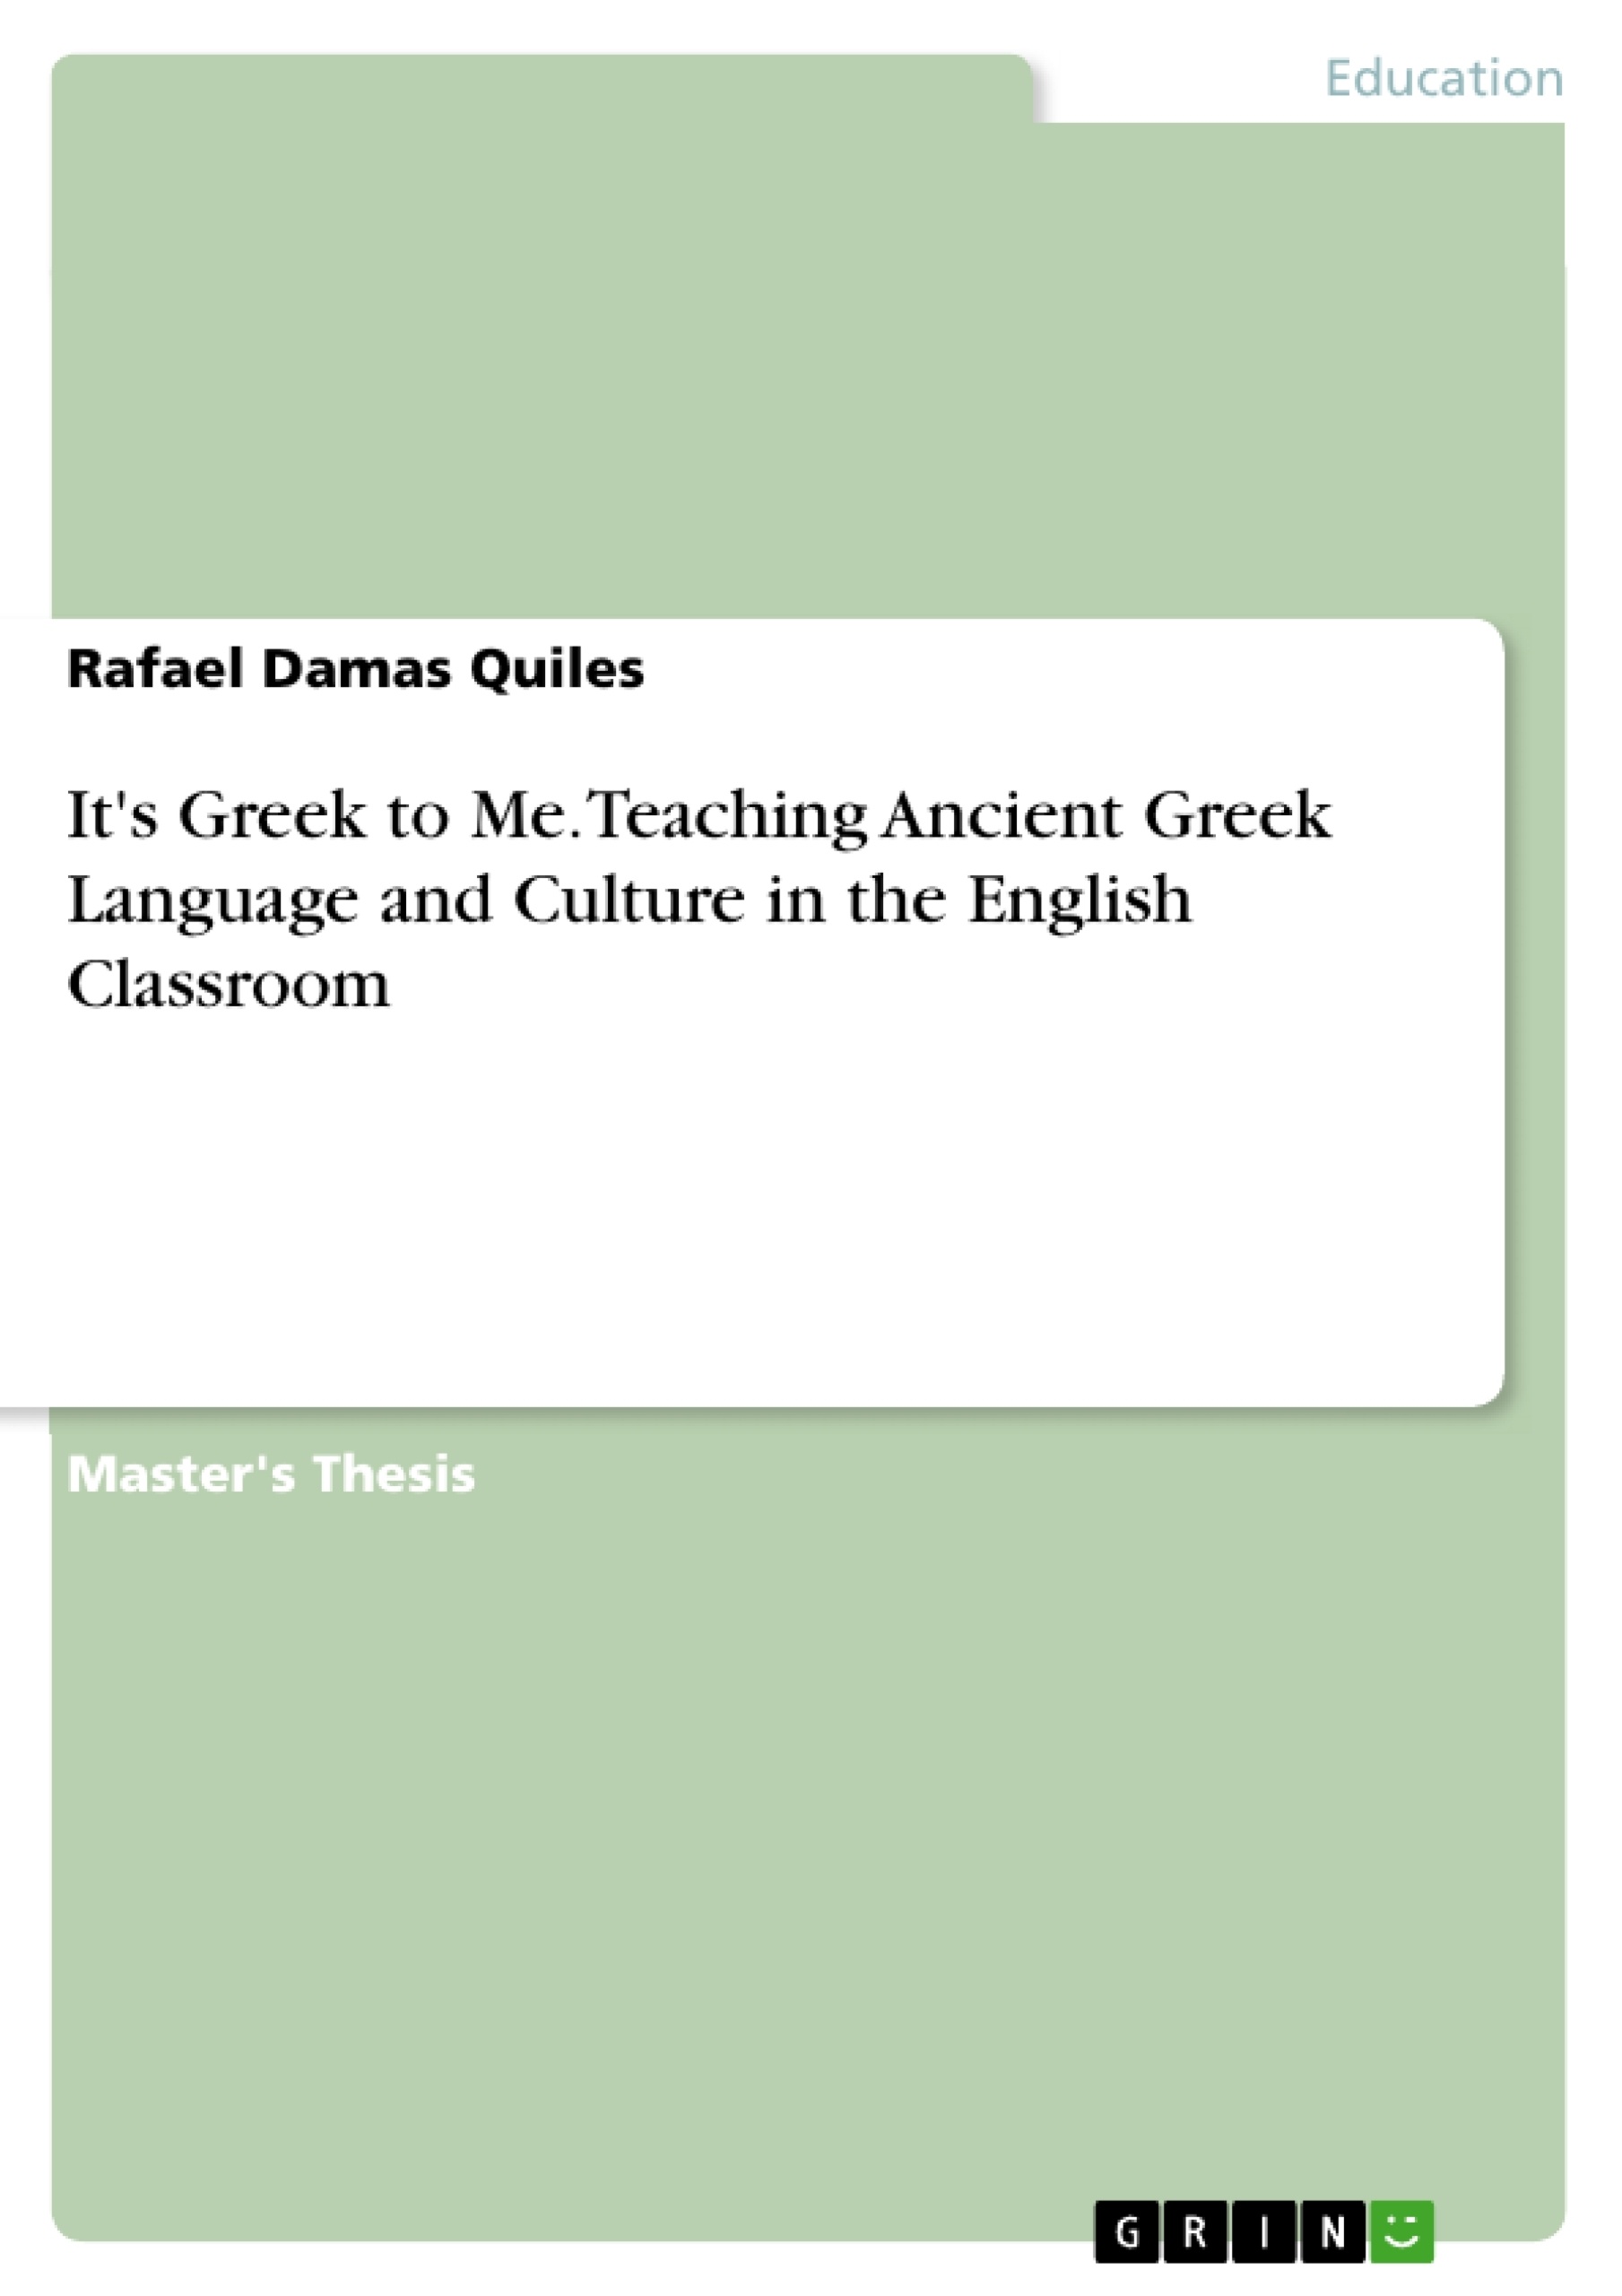 Title: It's Greek to Me. Teaching Ancient Greek Language and Culture in the English Classroom